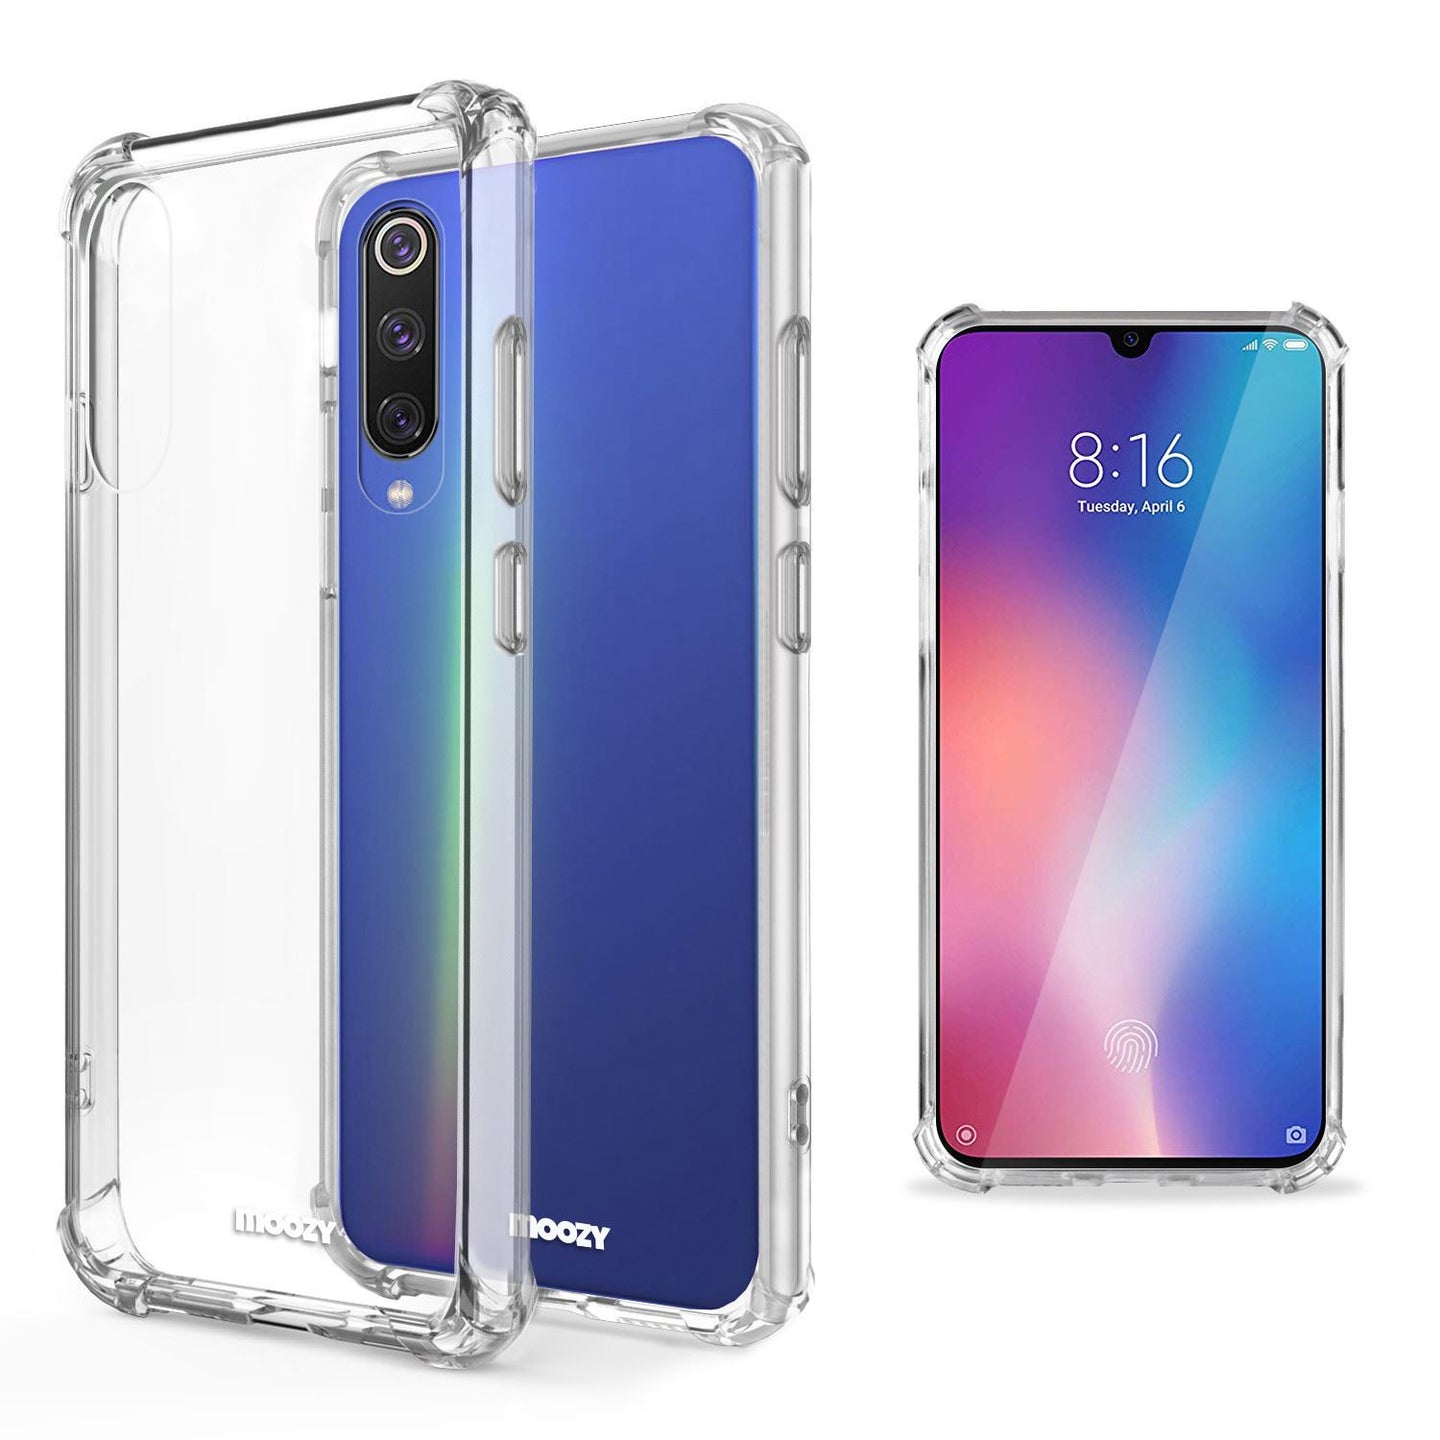 Moozy Shock Proof Silicone Case for Xiaomi Mi 9 - Transparent Crystal Clear Phone Case Soft TPU Cover